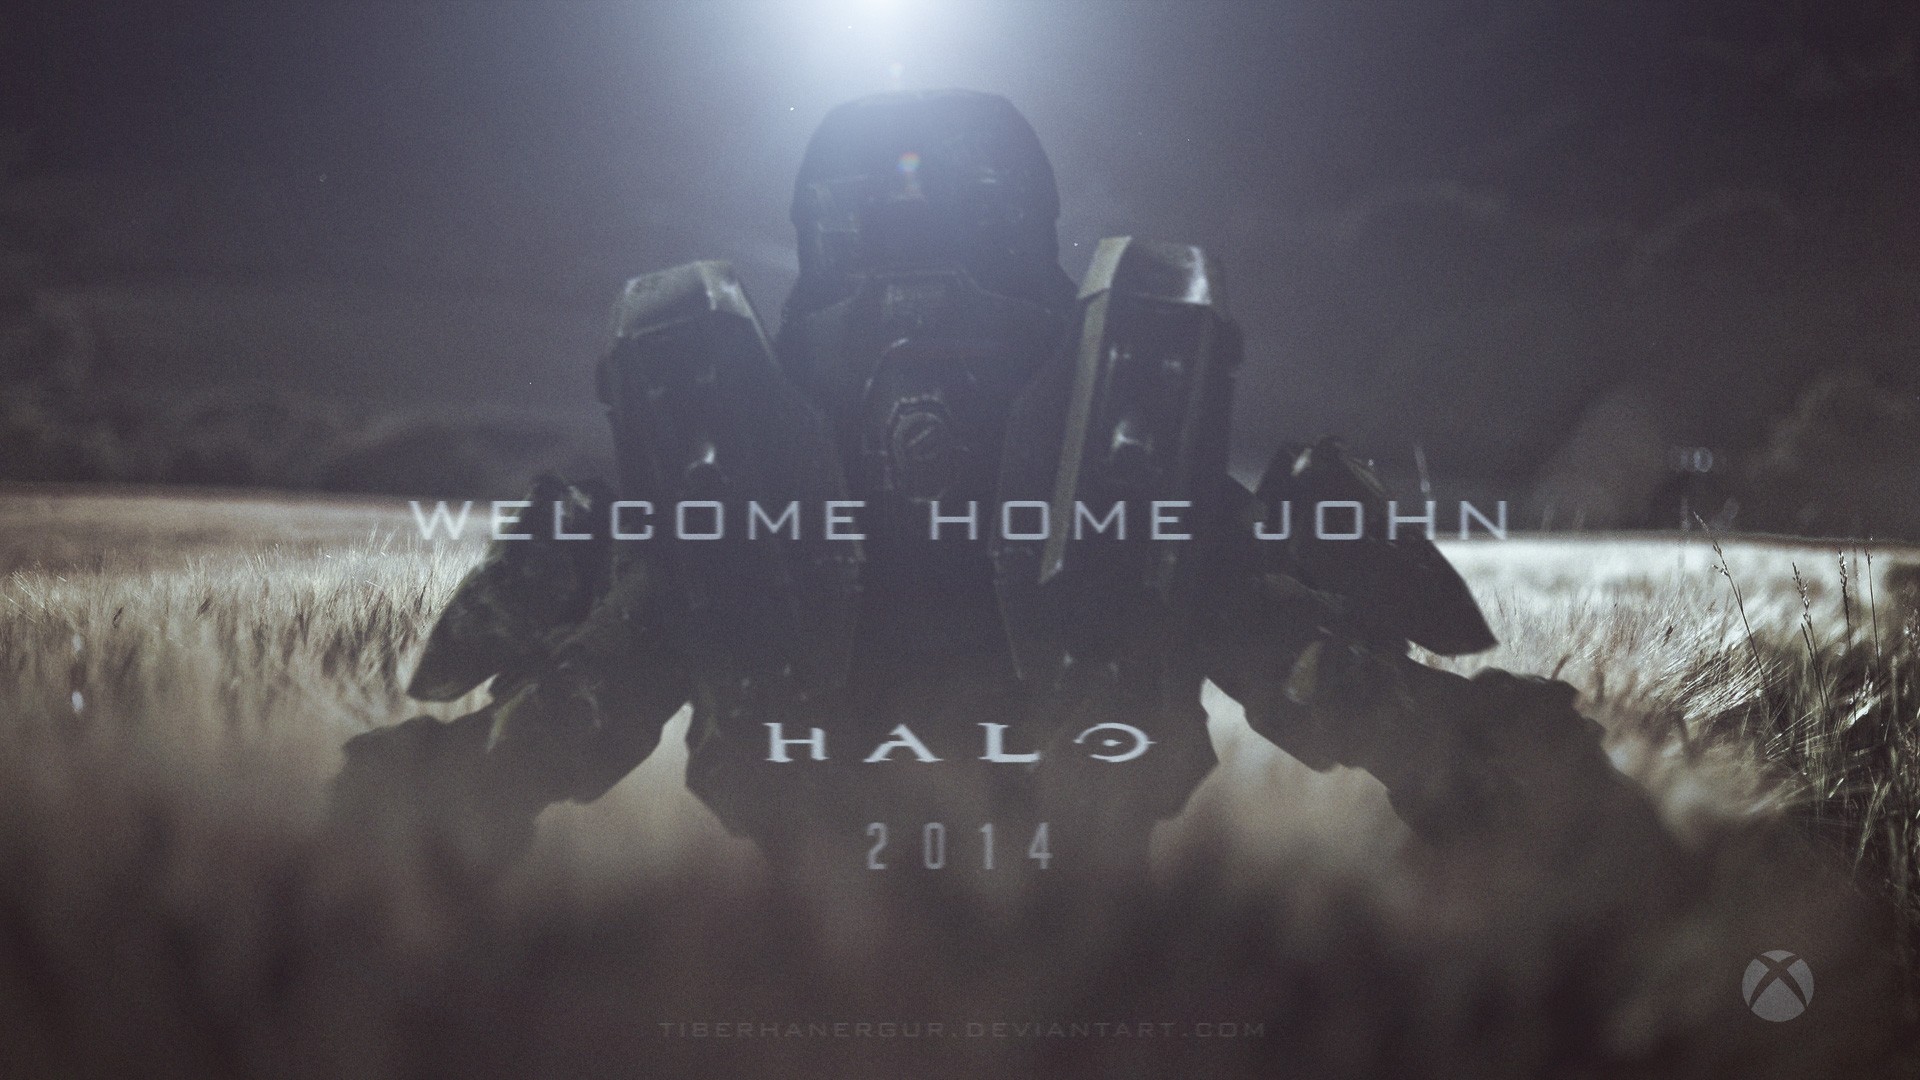 Halo, Master Chief, Xbox One, Halo: Master Chief Collection, Halo 5, Video Games Wallpaper